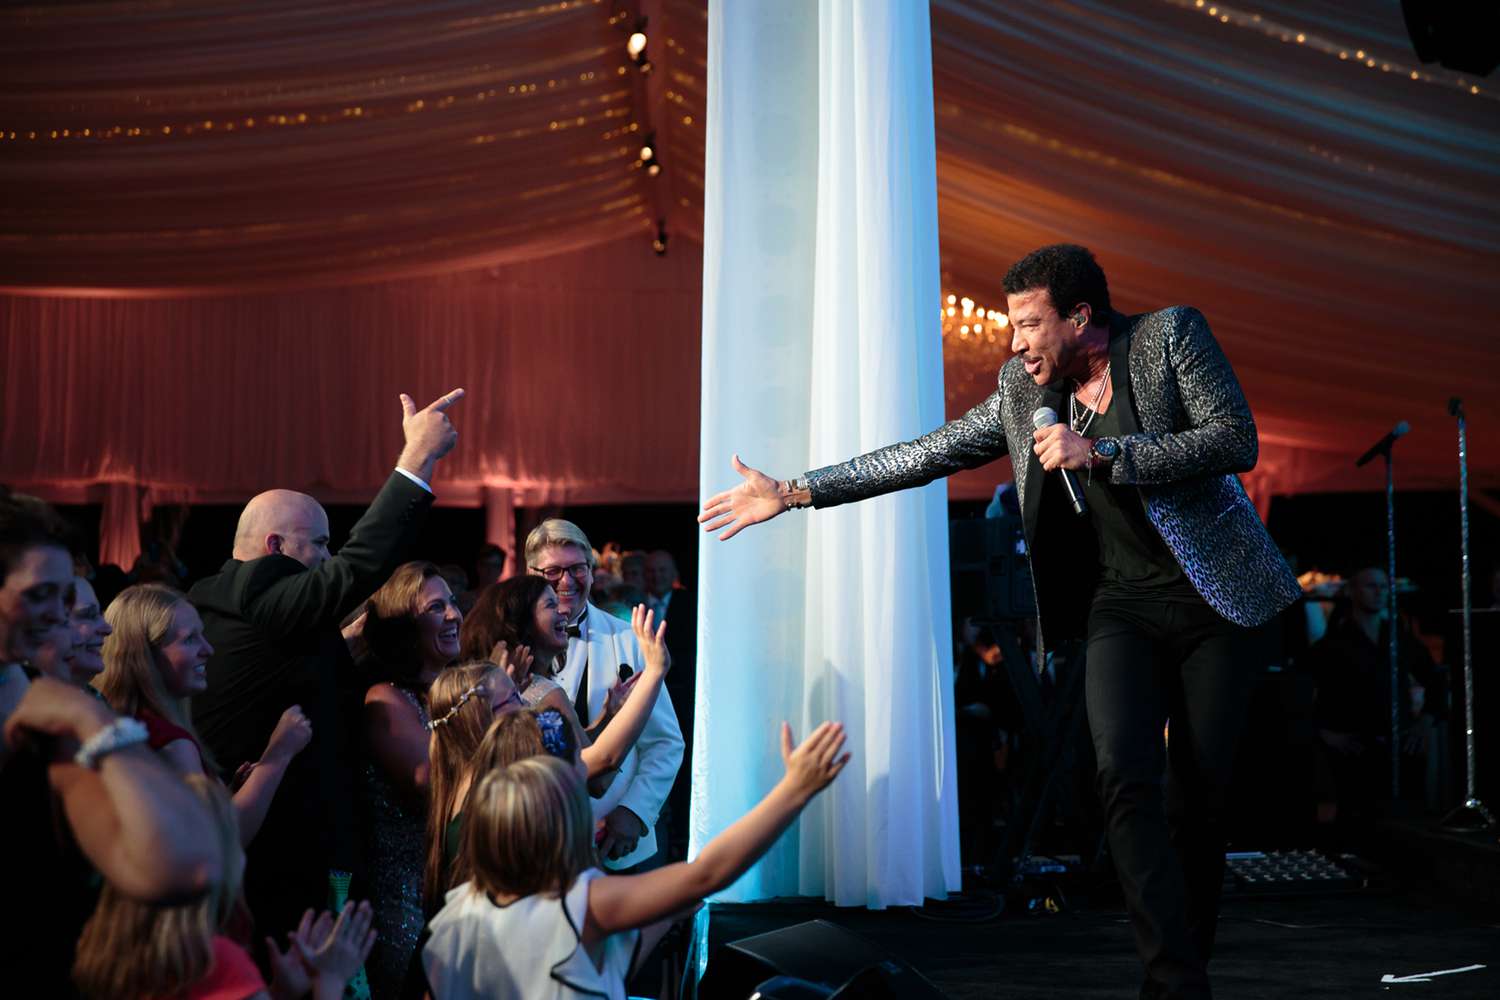 lionel richie performed at a wedding at the greenbrier resort